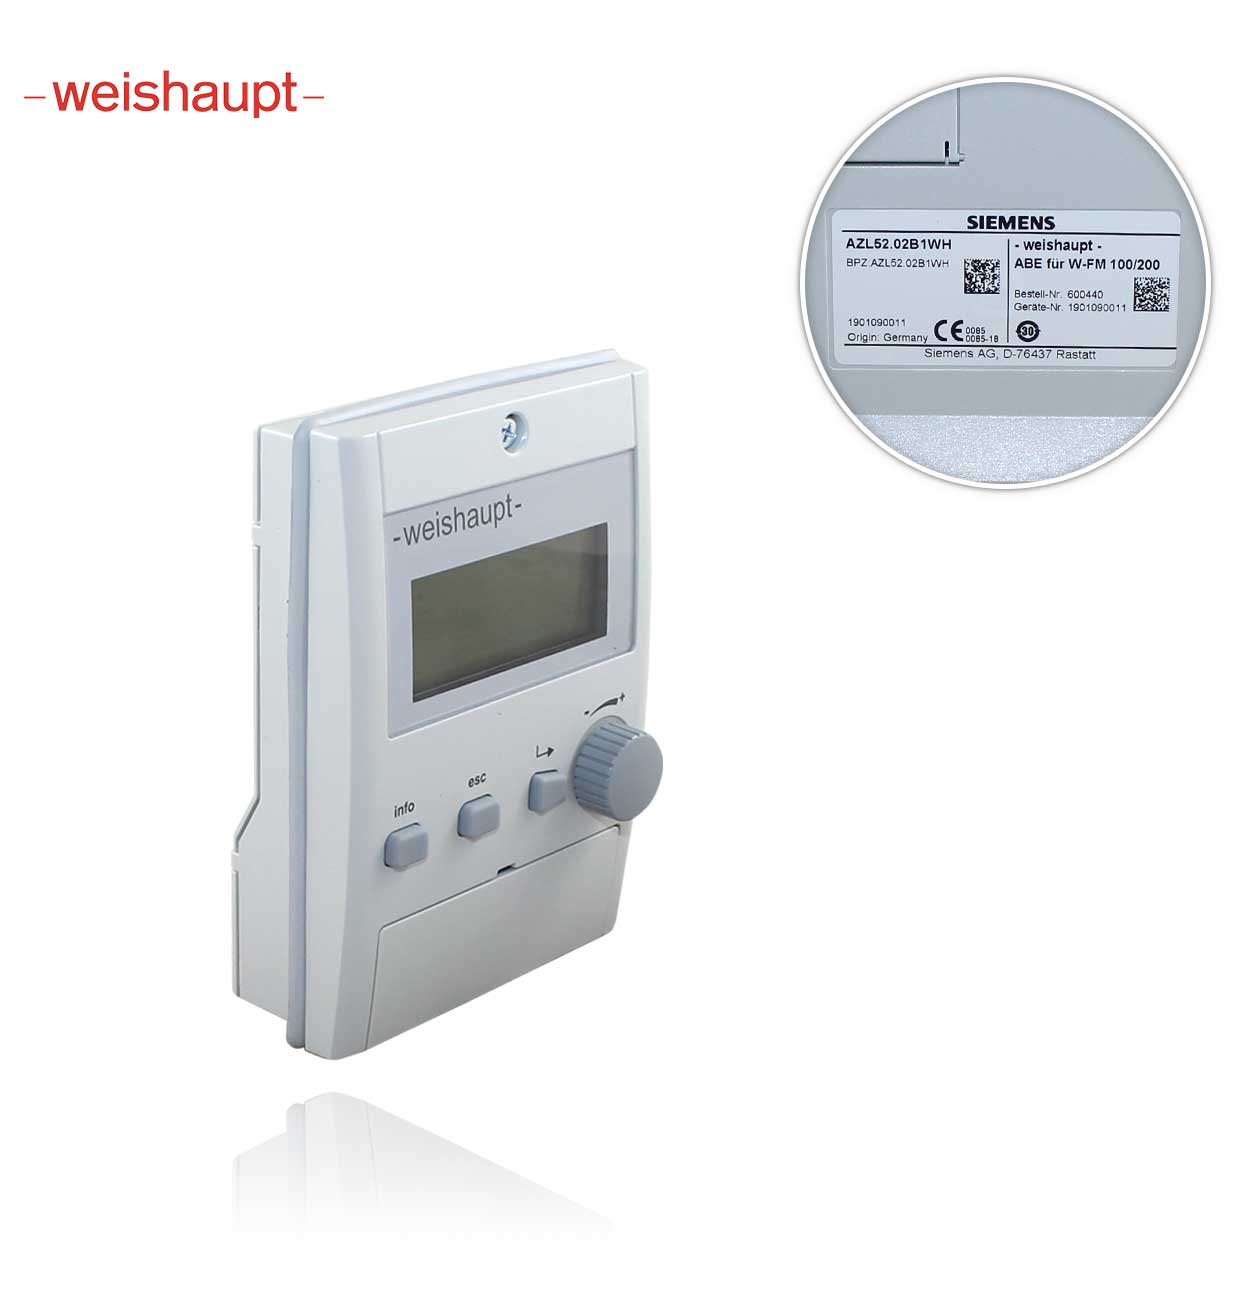 WEISHAUPT ABE FOR  W-FM 100/200  WESTERN EUROPE  2 HGBLD  GB, NL, DK, S, N, FIN 877.50